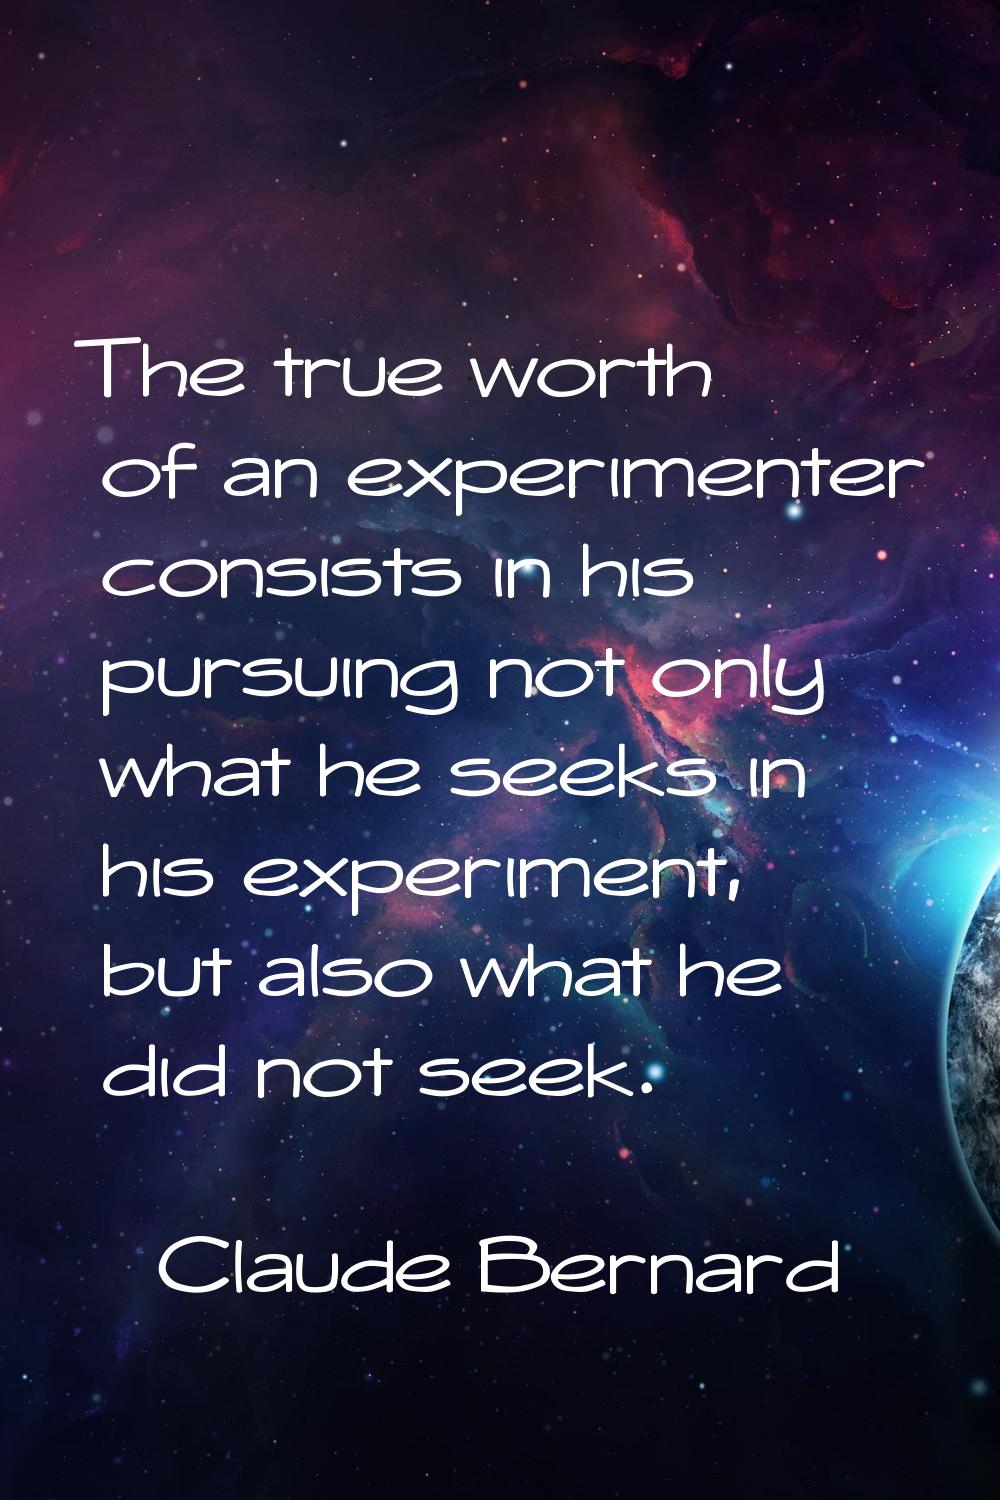 The true worth of an experimenter consists in his pursuing not only what he seeks in his experiment